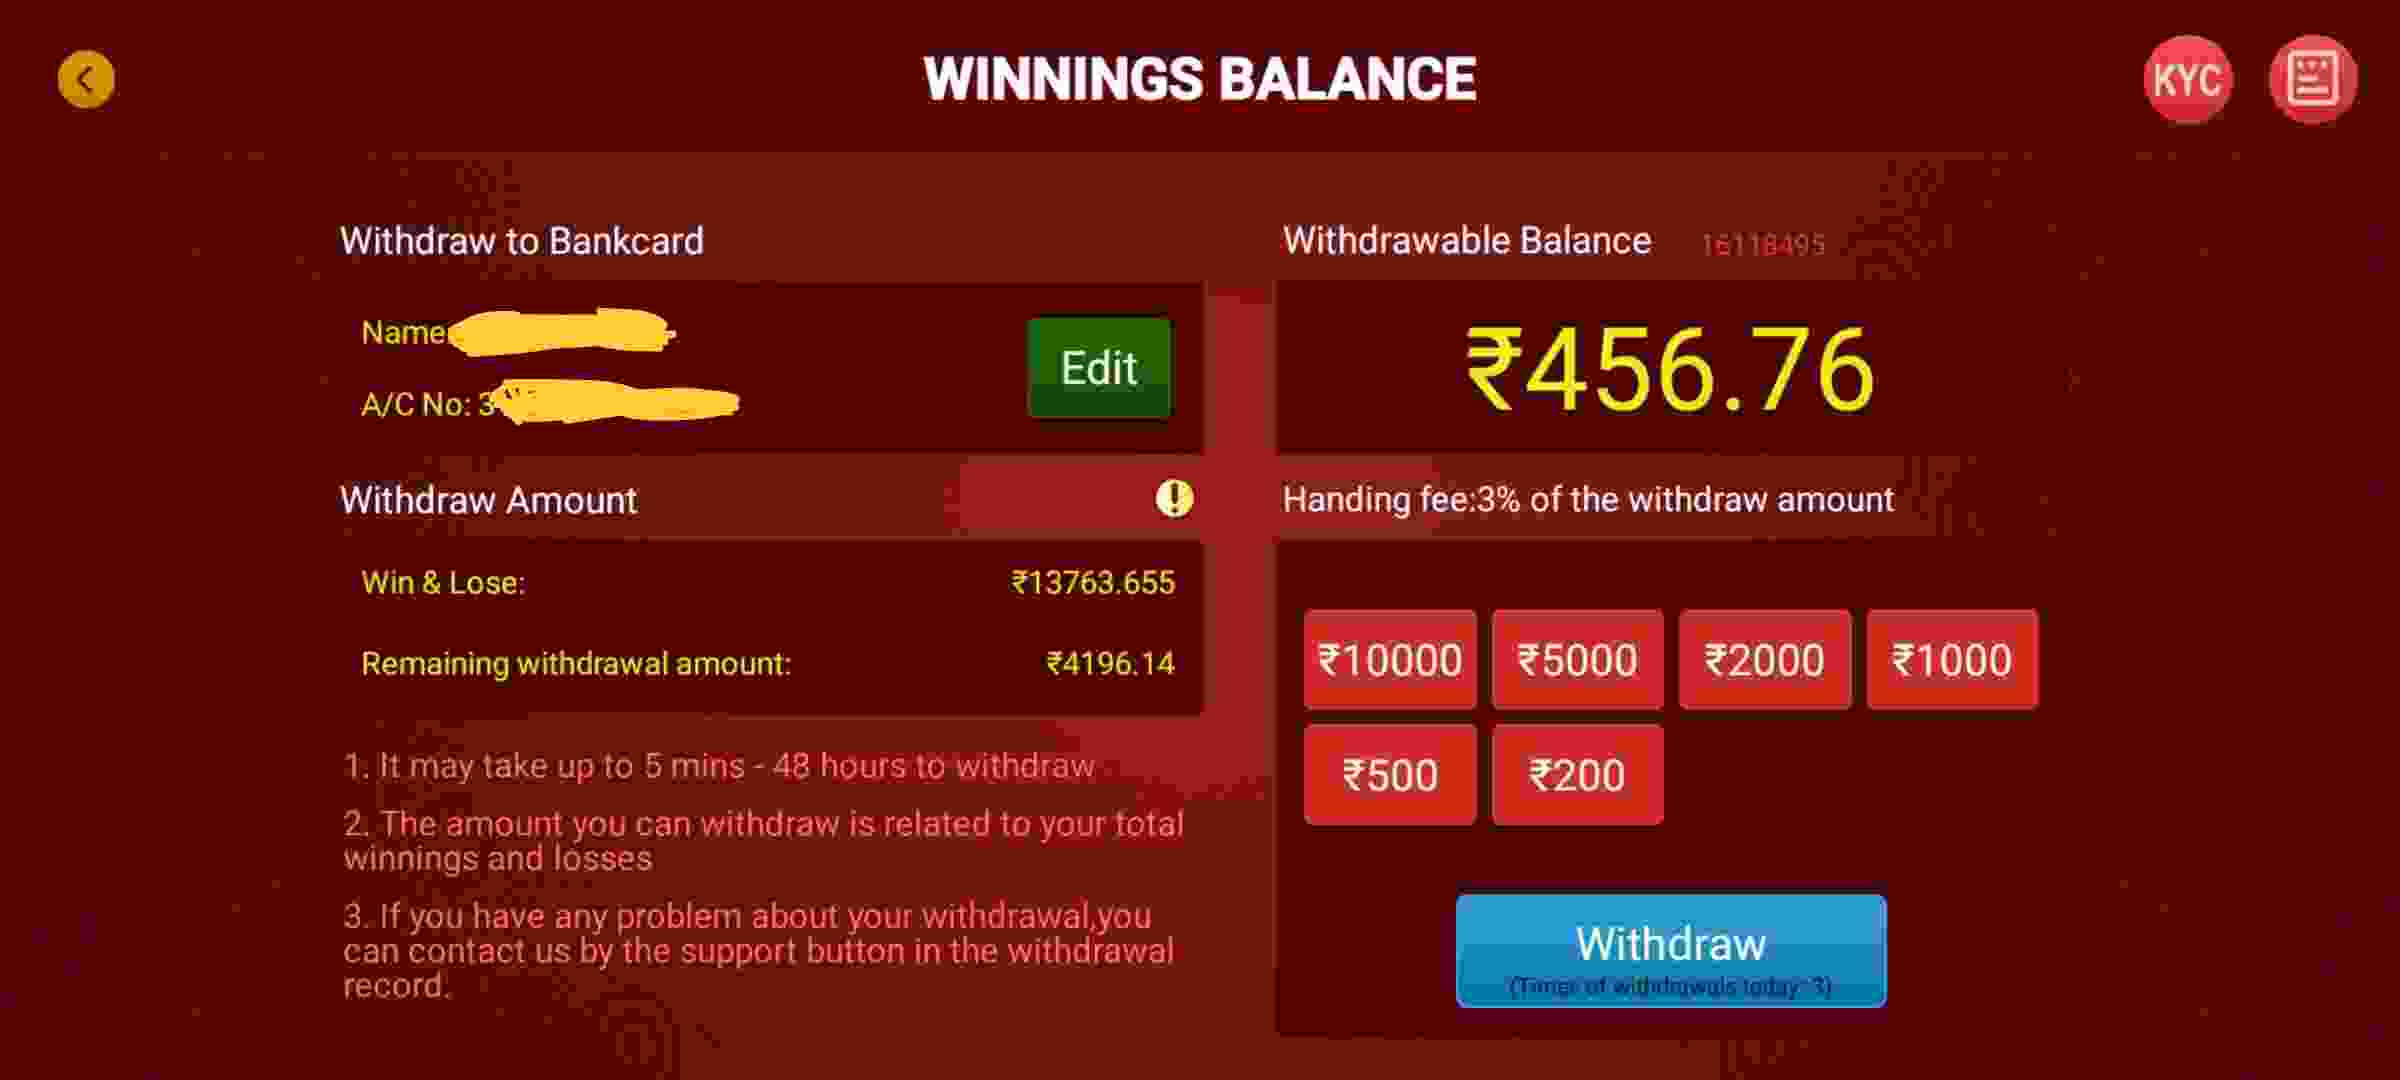 rummy,rummy king,junglee rummy,rummy game,play rummy,indian rummy,new rummy earning app today,rummy spin game,rummy kaise khele hindi,rummy spin,rummy card game,rummy online,new rummy app,rummy circle,junglee rummy spin & go,spin & go junglee rummy,rummy gold spine,a23 rummy,rummy pro,roz rummy,online rummy cash,rummy spin master,play rummy online,rummy online free,real rummy,rummy plus,online rummy sites,spin and go in rummy